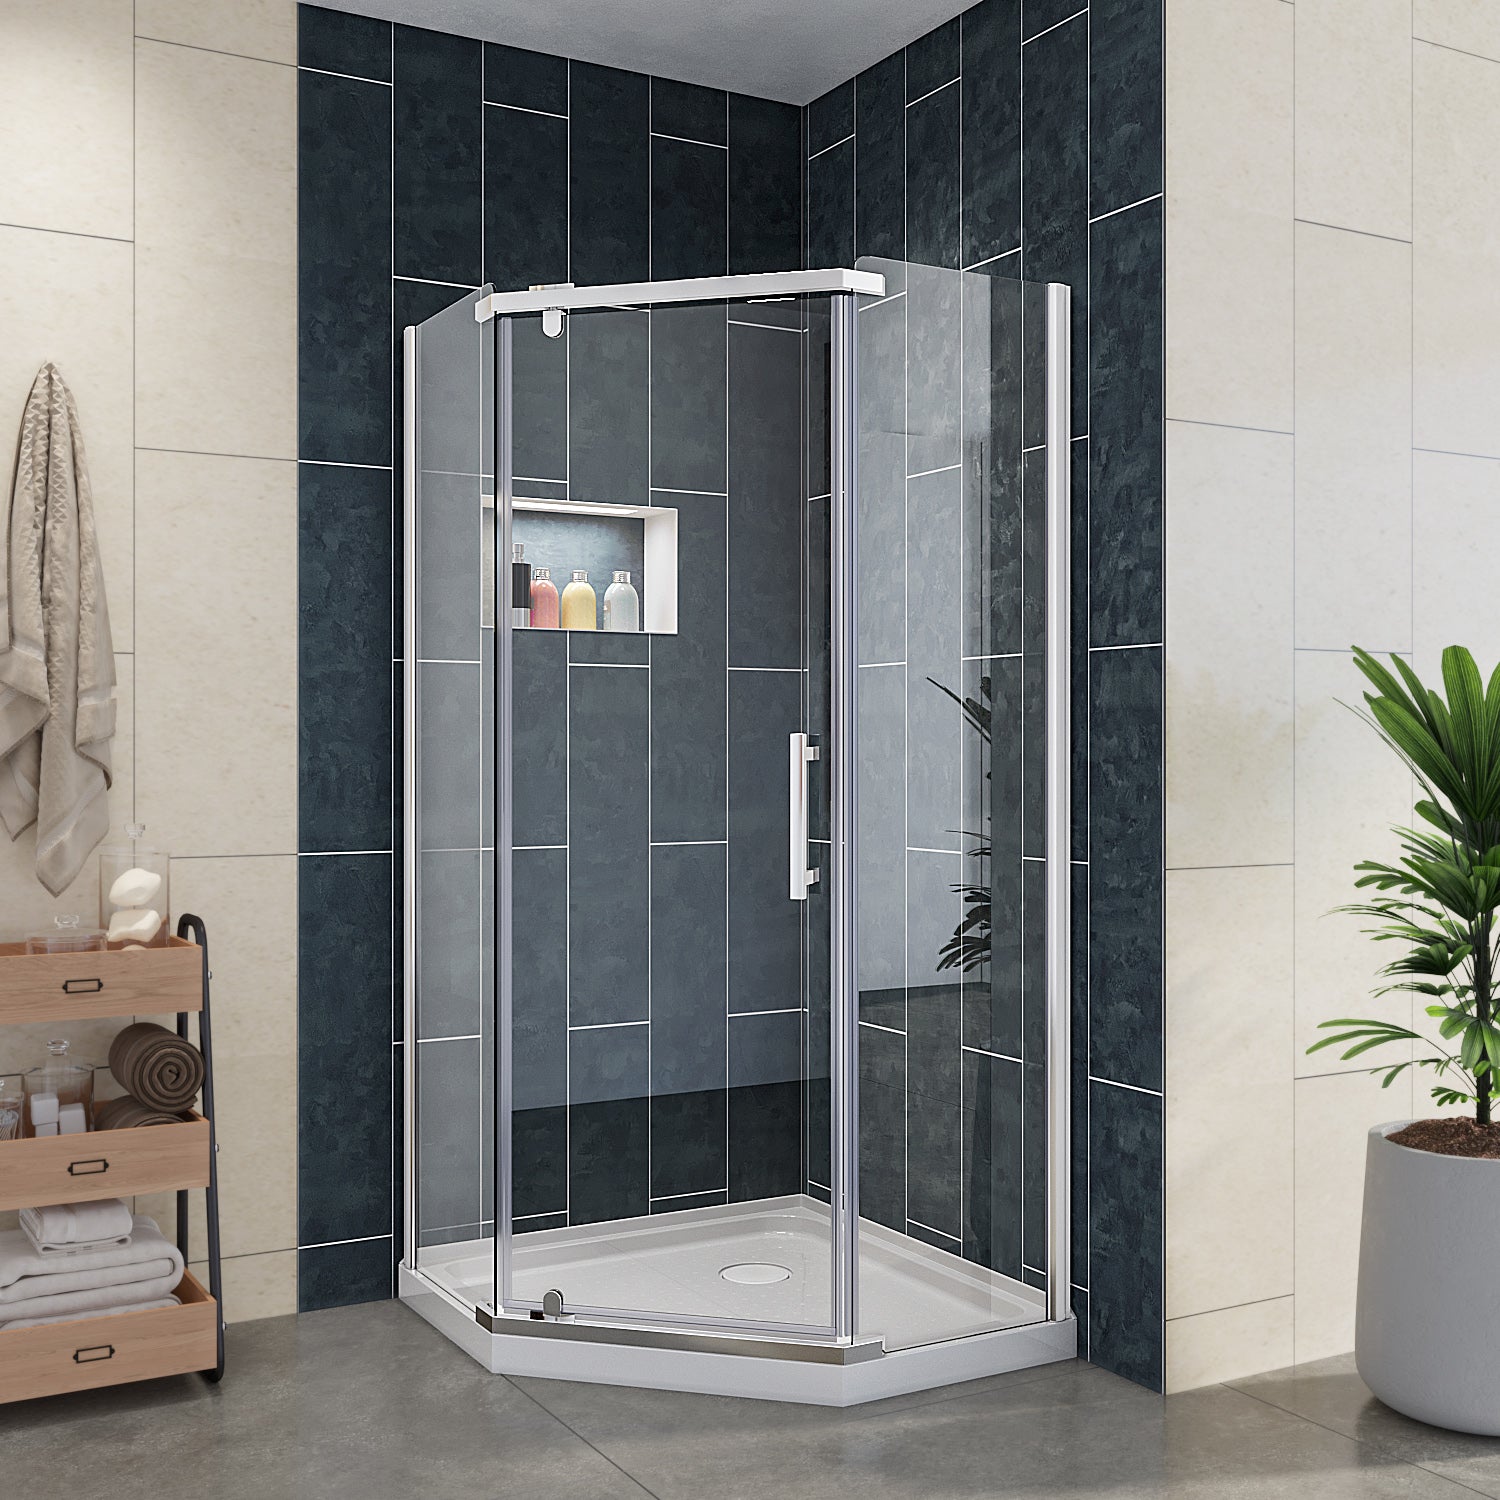 SUNNY SHOWER 36.7 in. W x 36.7 in. D x 71.8 in. H Chrome Finish Pivot Enclosures With Pivot Door And White Diamond Bases